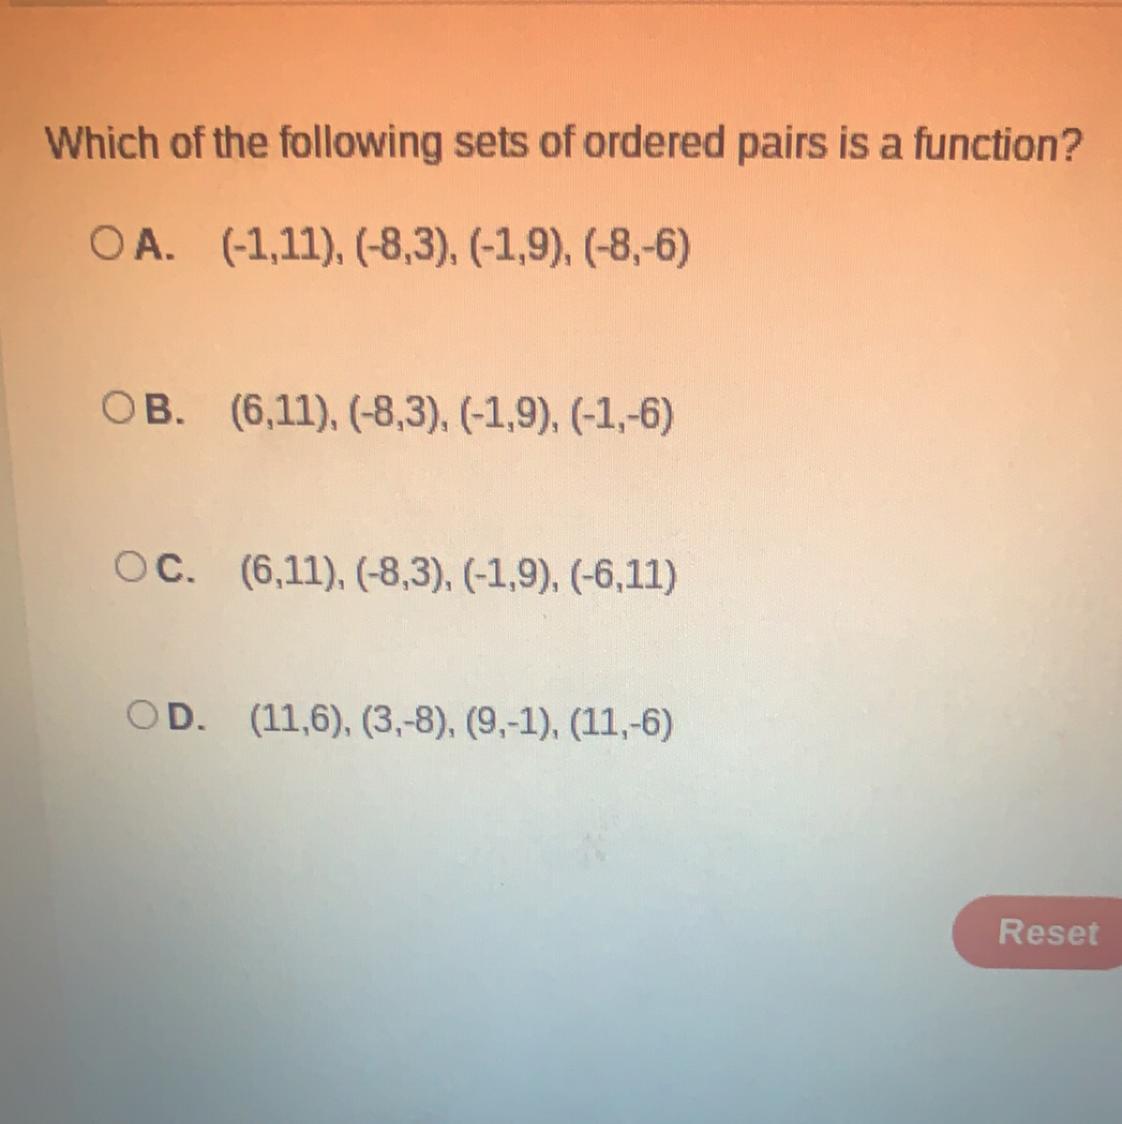 Which Of The Following Sets Of Ordered Pairs Is A Function? Pls Look At Picture And Help Me Out